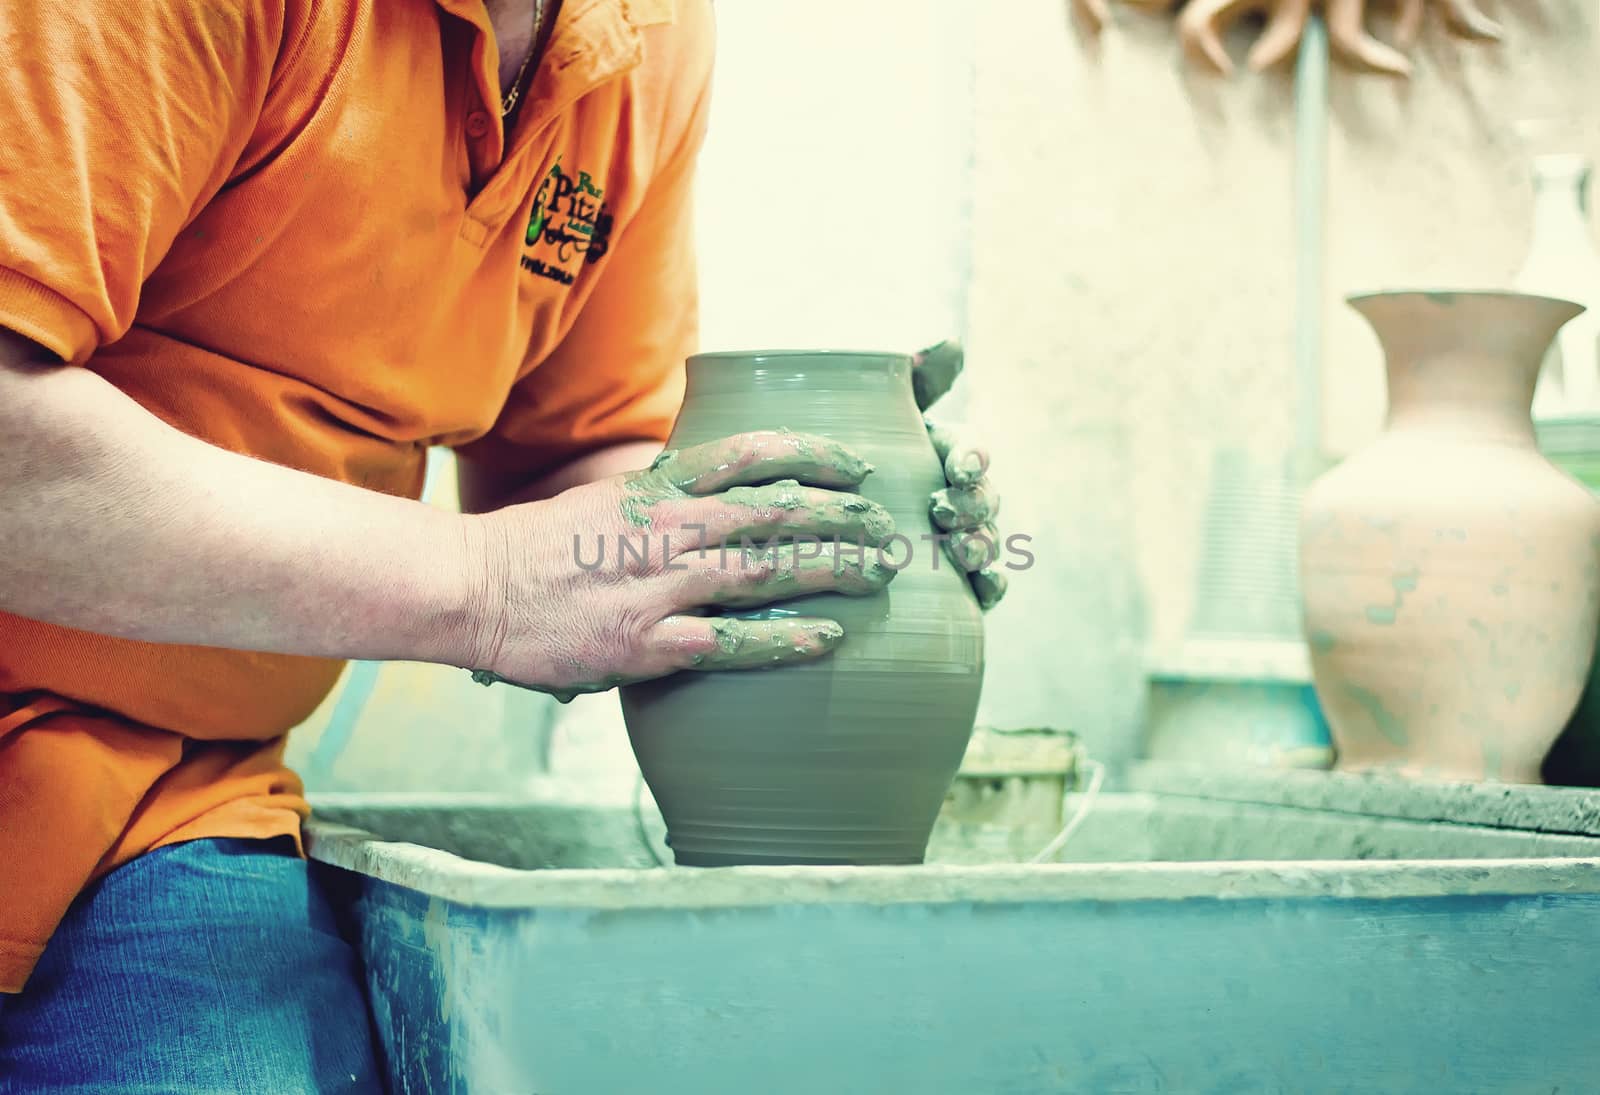 People at work: the production of ceramic vases on a Potter's wh by georgina198